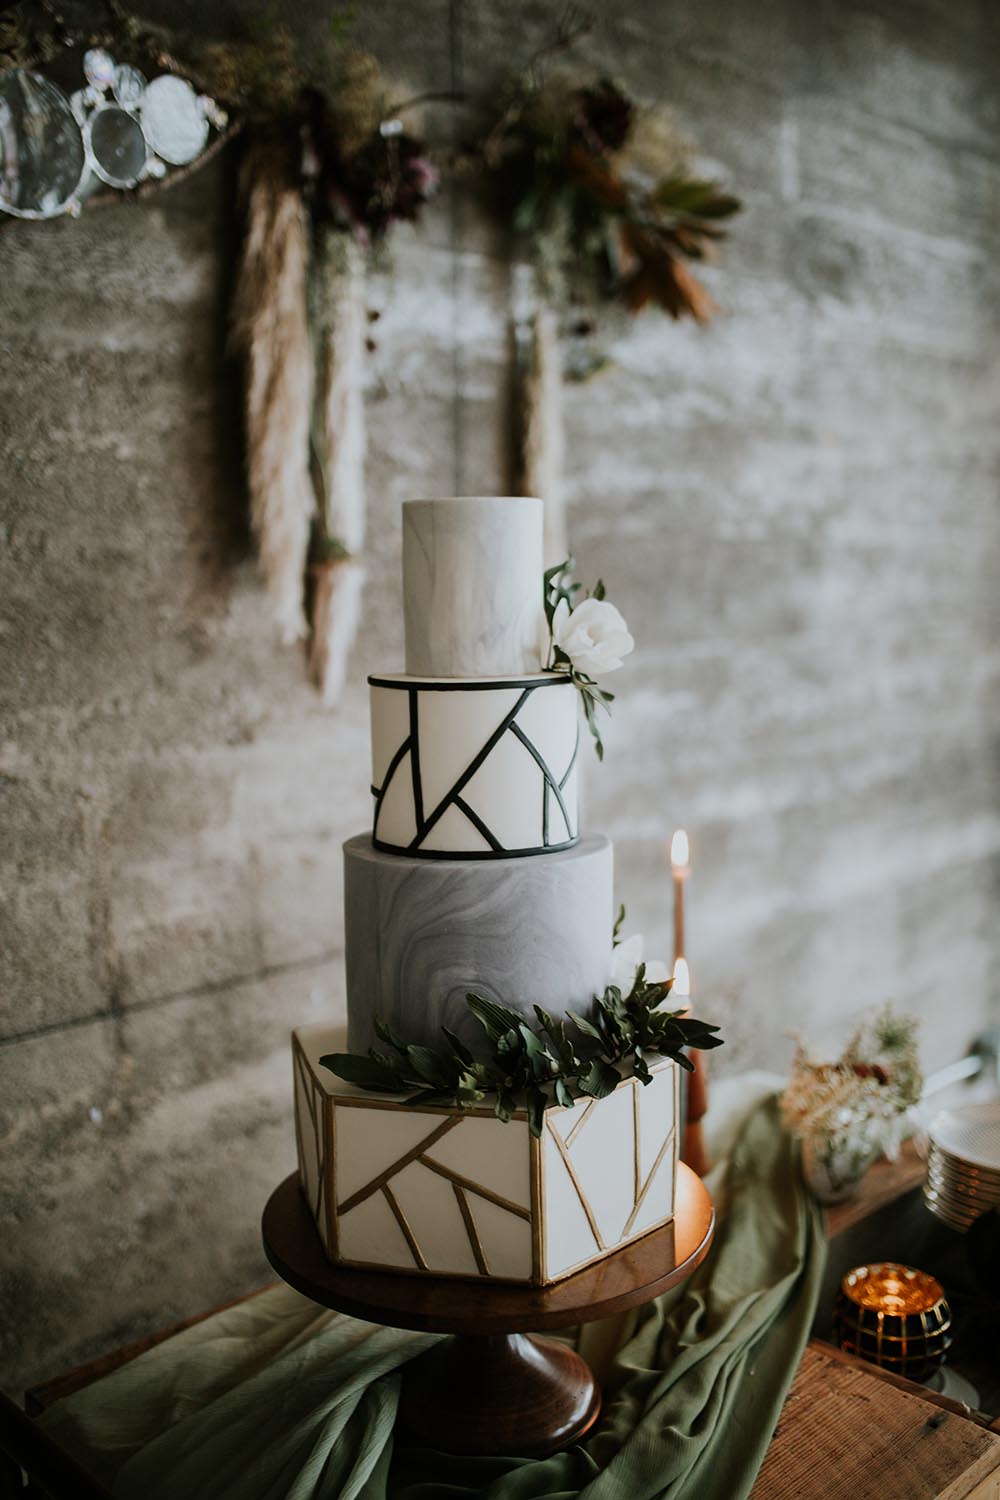 Wedding inspiration: leather accents, a geometric wedding cake and rich tones | Jamie Carle Photography